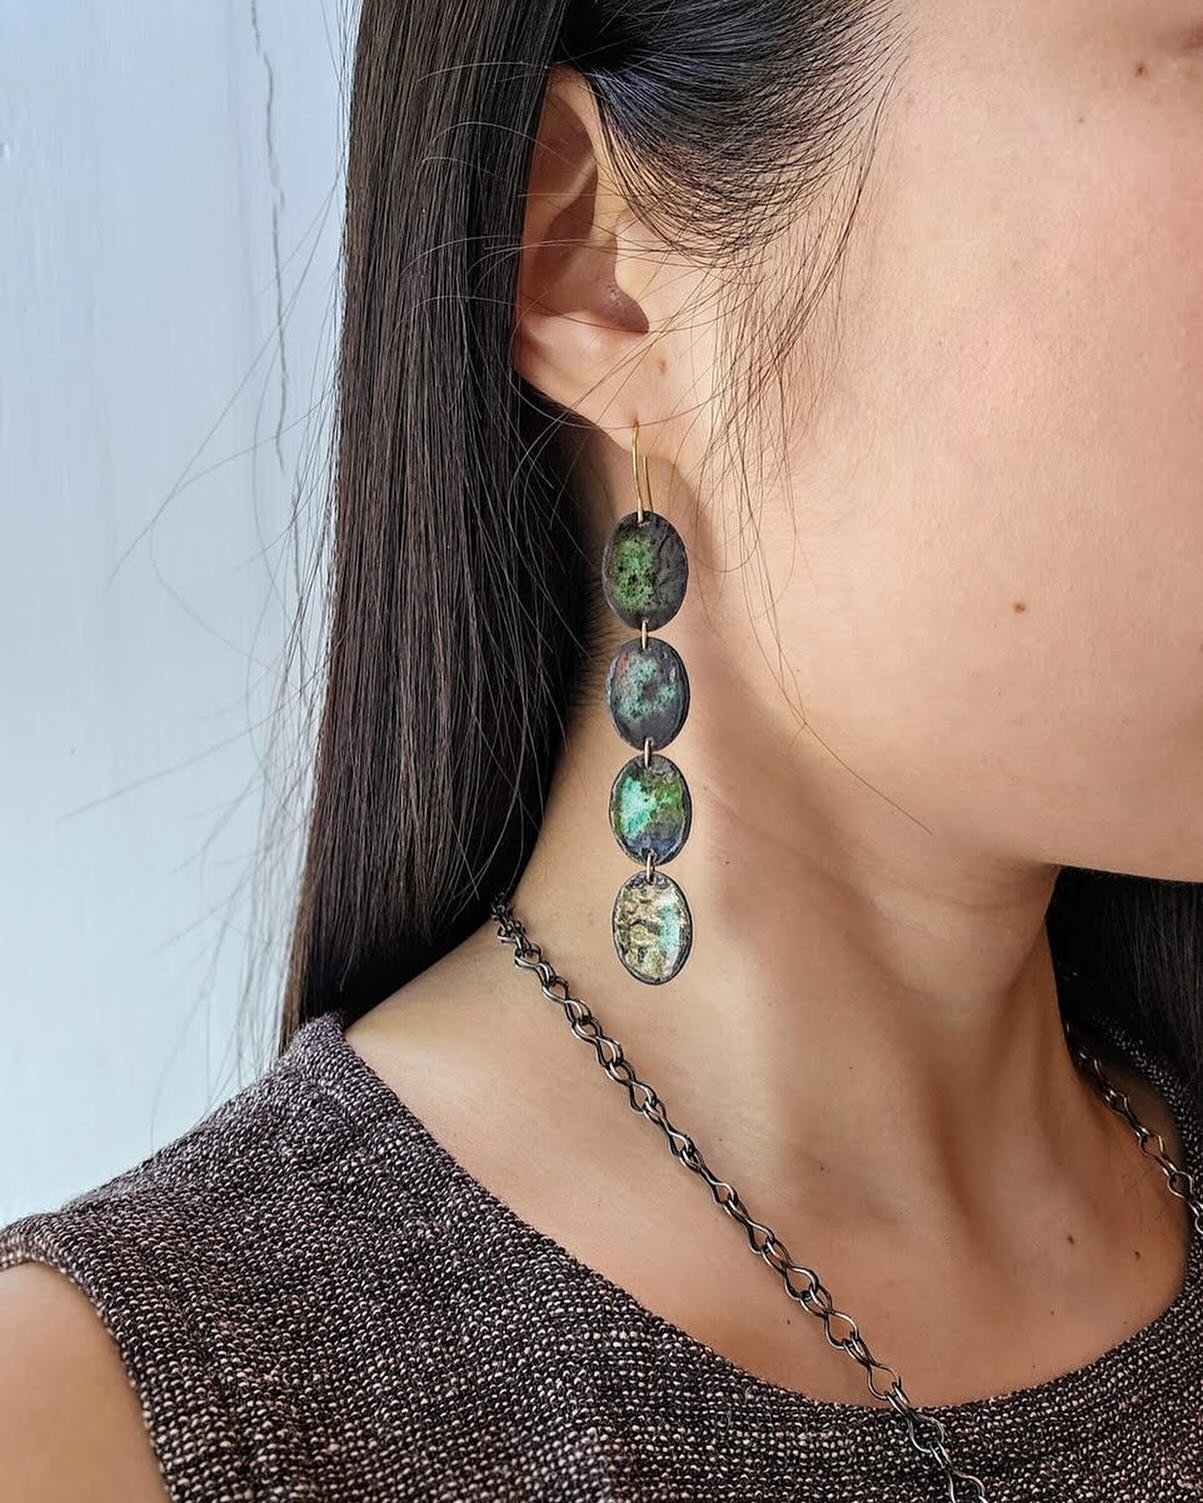 These 4-Tier Corrosion Enamel Earrings by Maya Kini found a home at our artist meet &amp; greet... luckily we can often request pieces to be remade, directly from our artists! 

Come by 1816 Fourth Street to discuss a special order with one of our ga